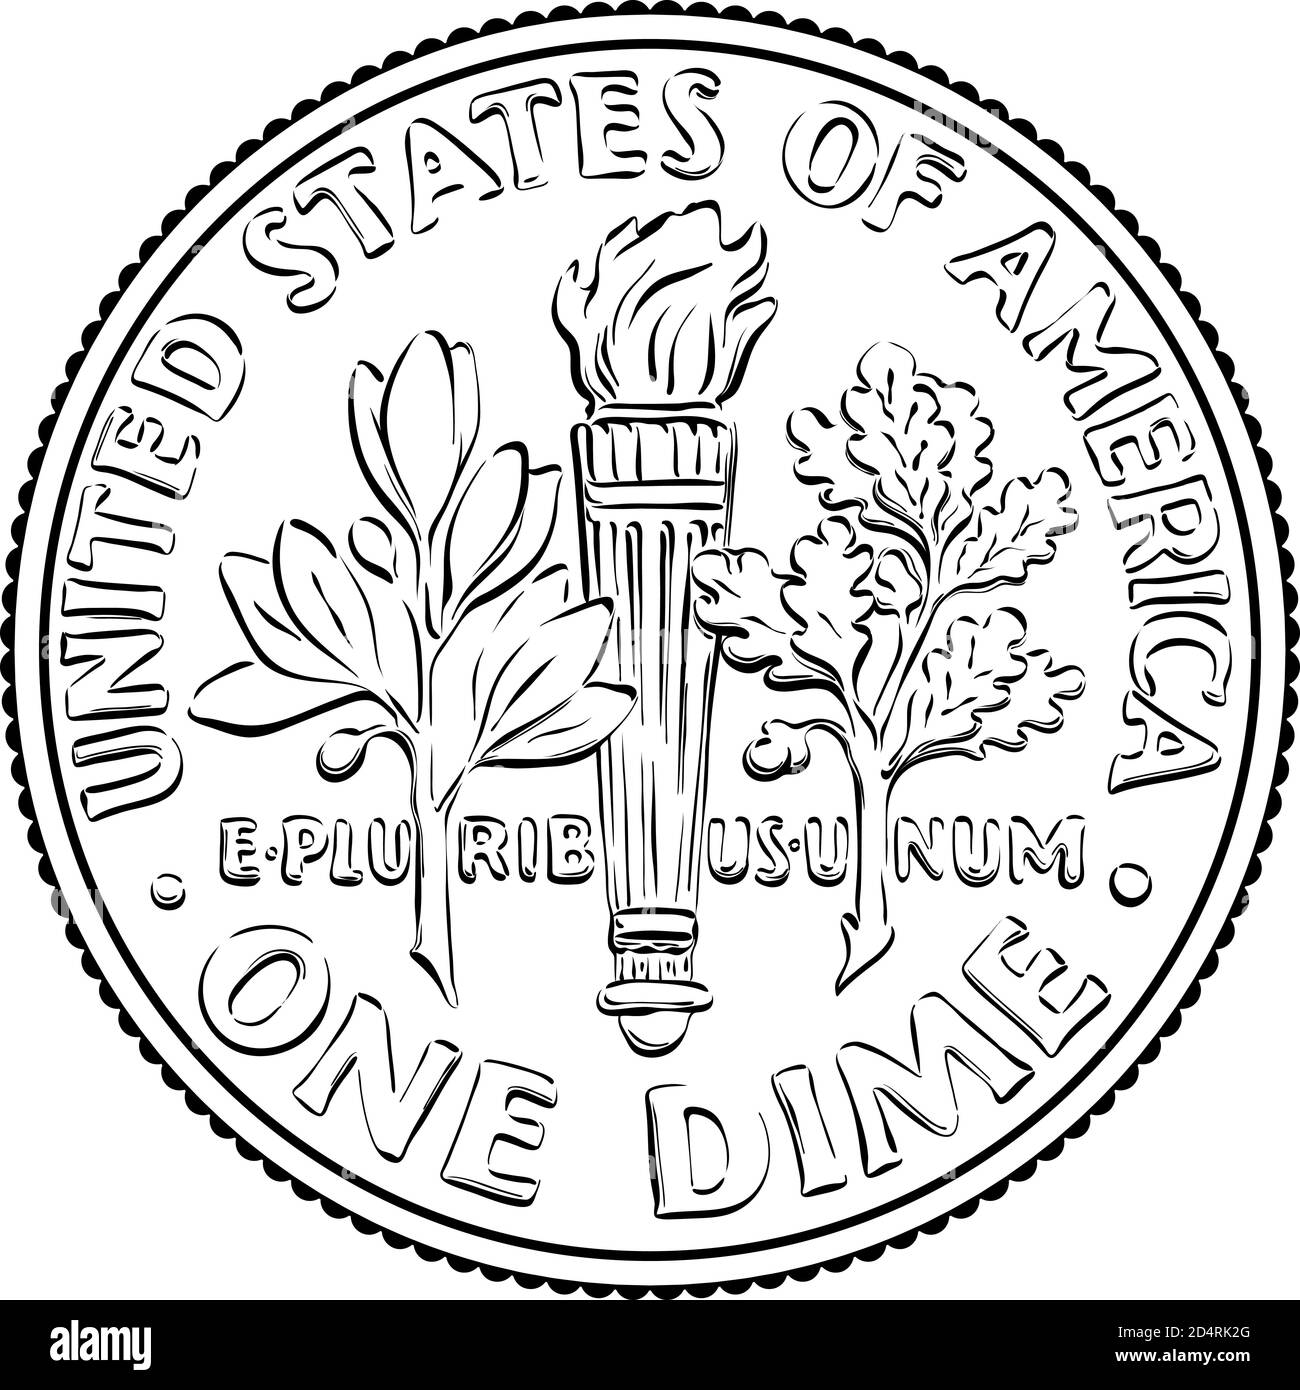 American money Roosevelt dime, United States one dime or 10-cent silver coin, olive branch, torch, oak branch on reverse. Black and white image Stock Vector